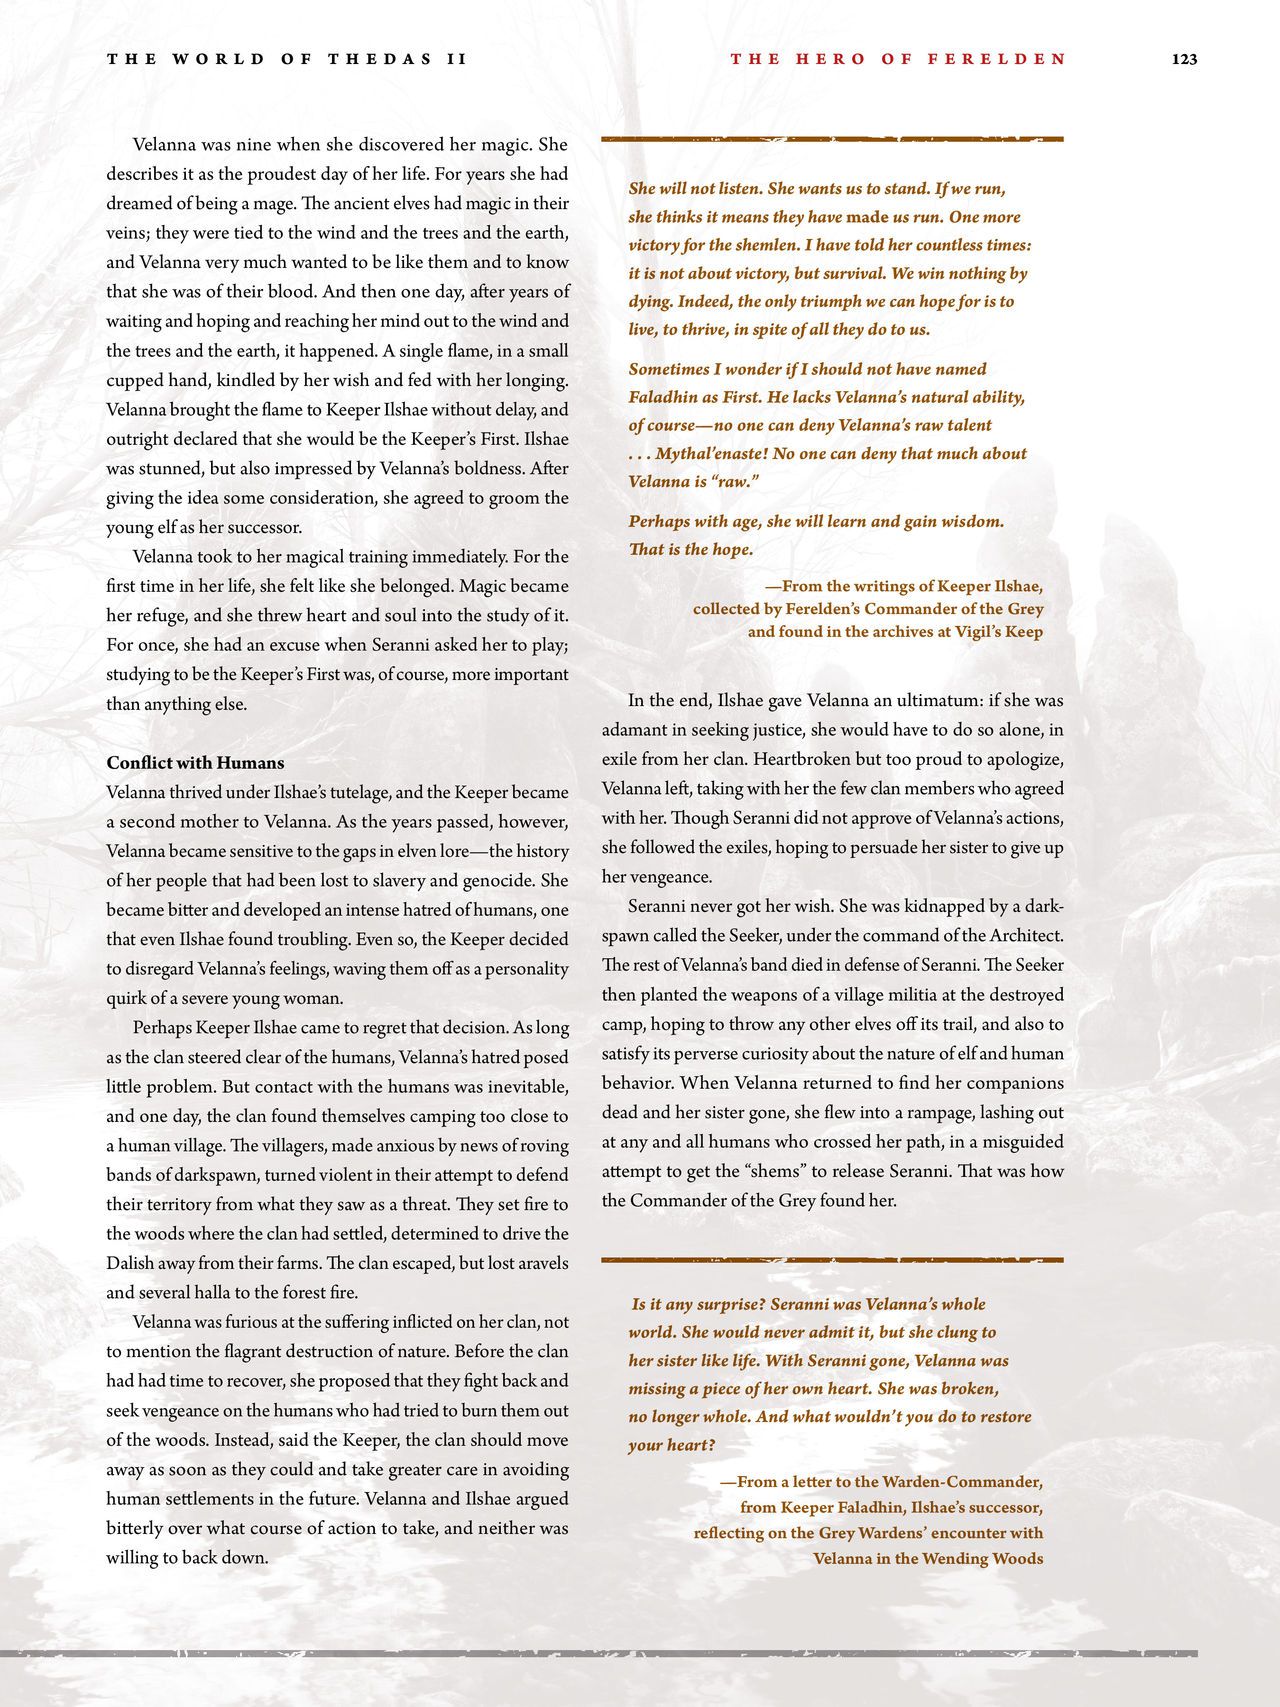 Dragon Age - The World of Thedas v02 119